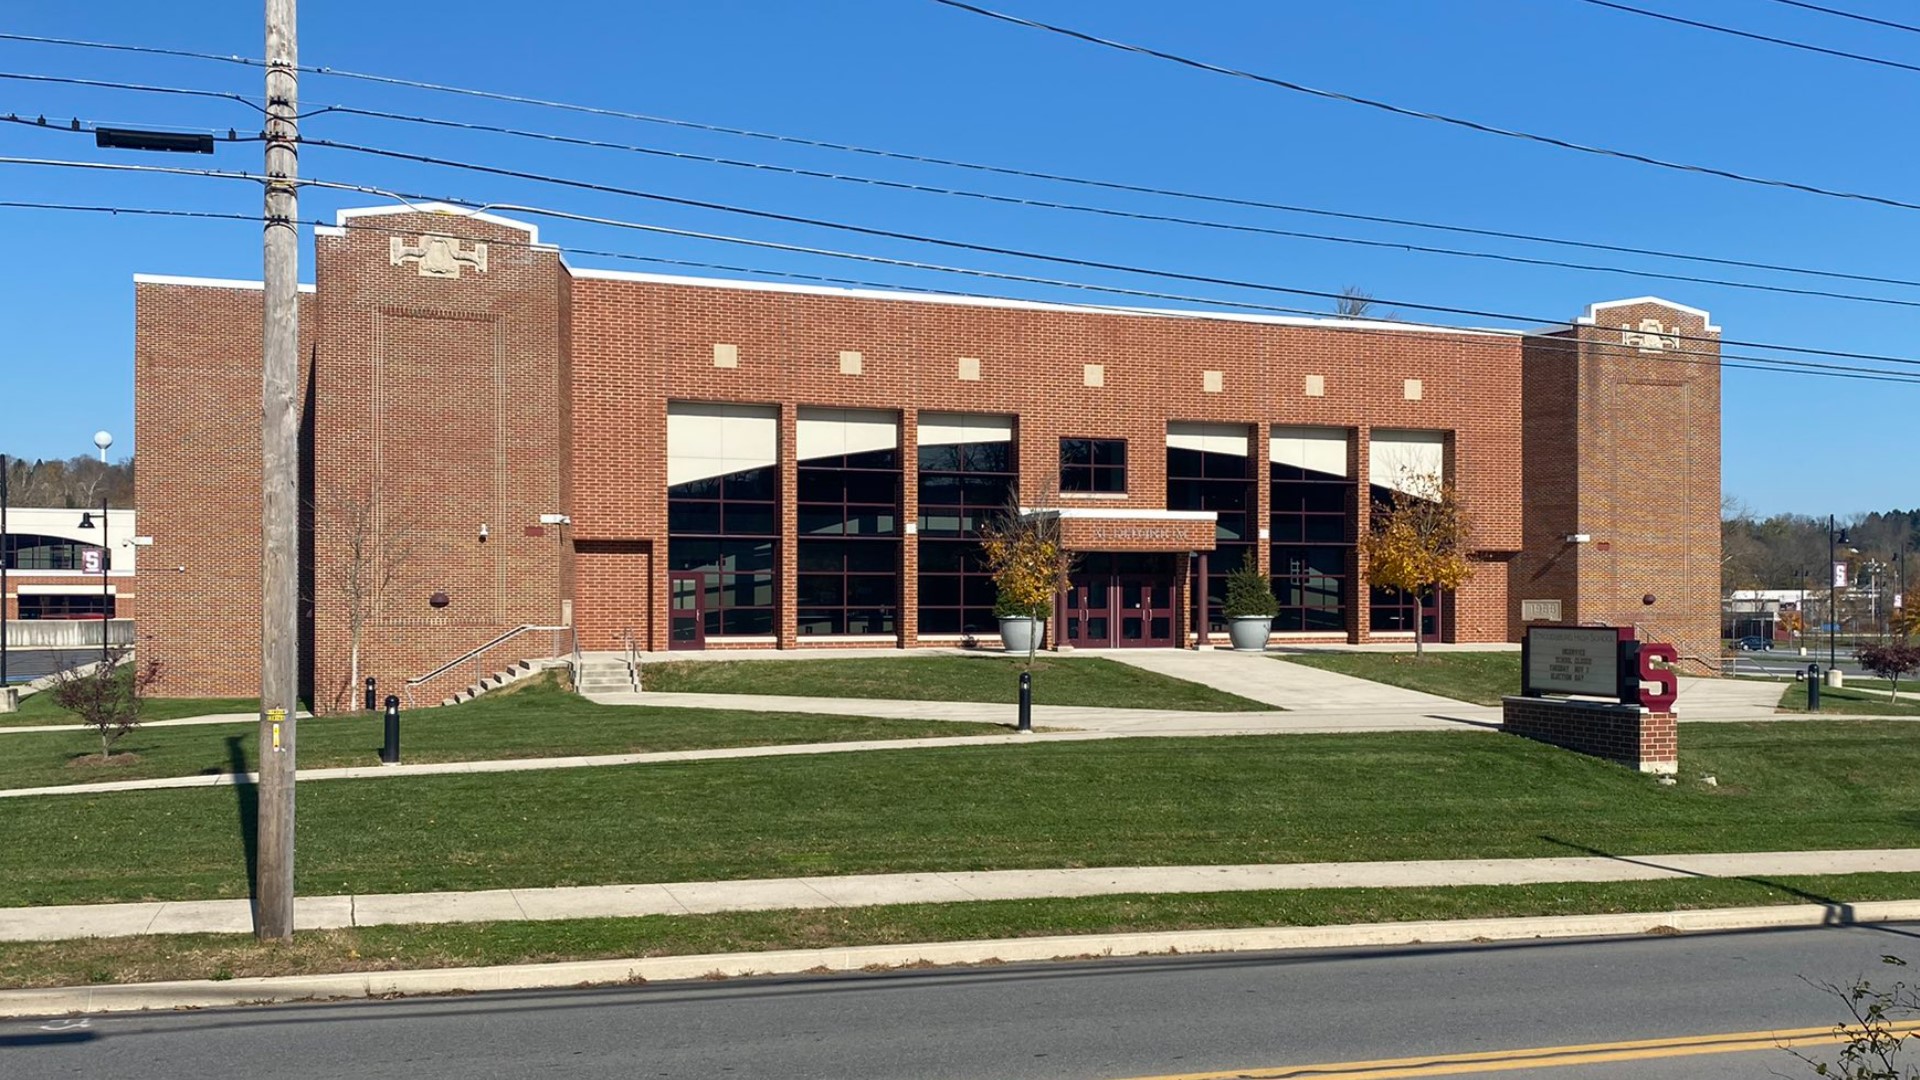 The coronavirus has forced Stroudsburg Area School District to close two of its buildings for a few days.